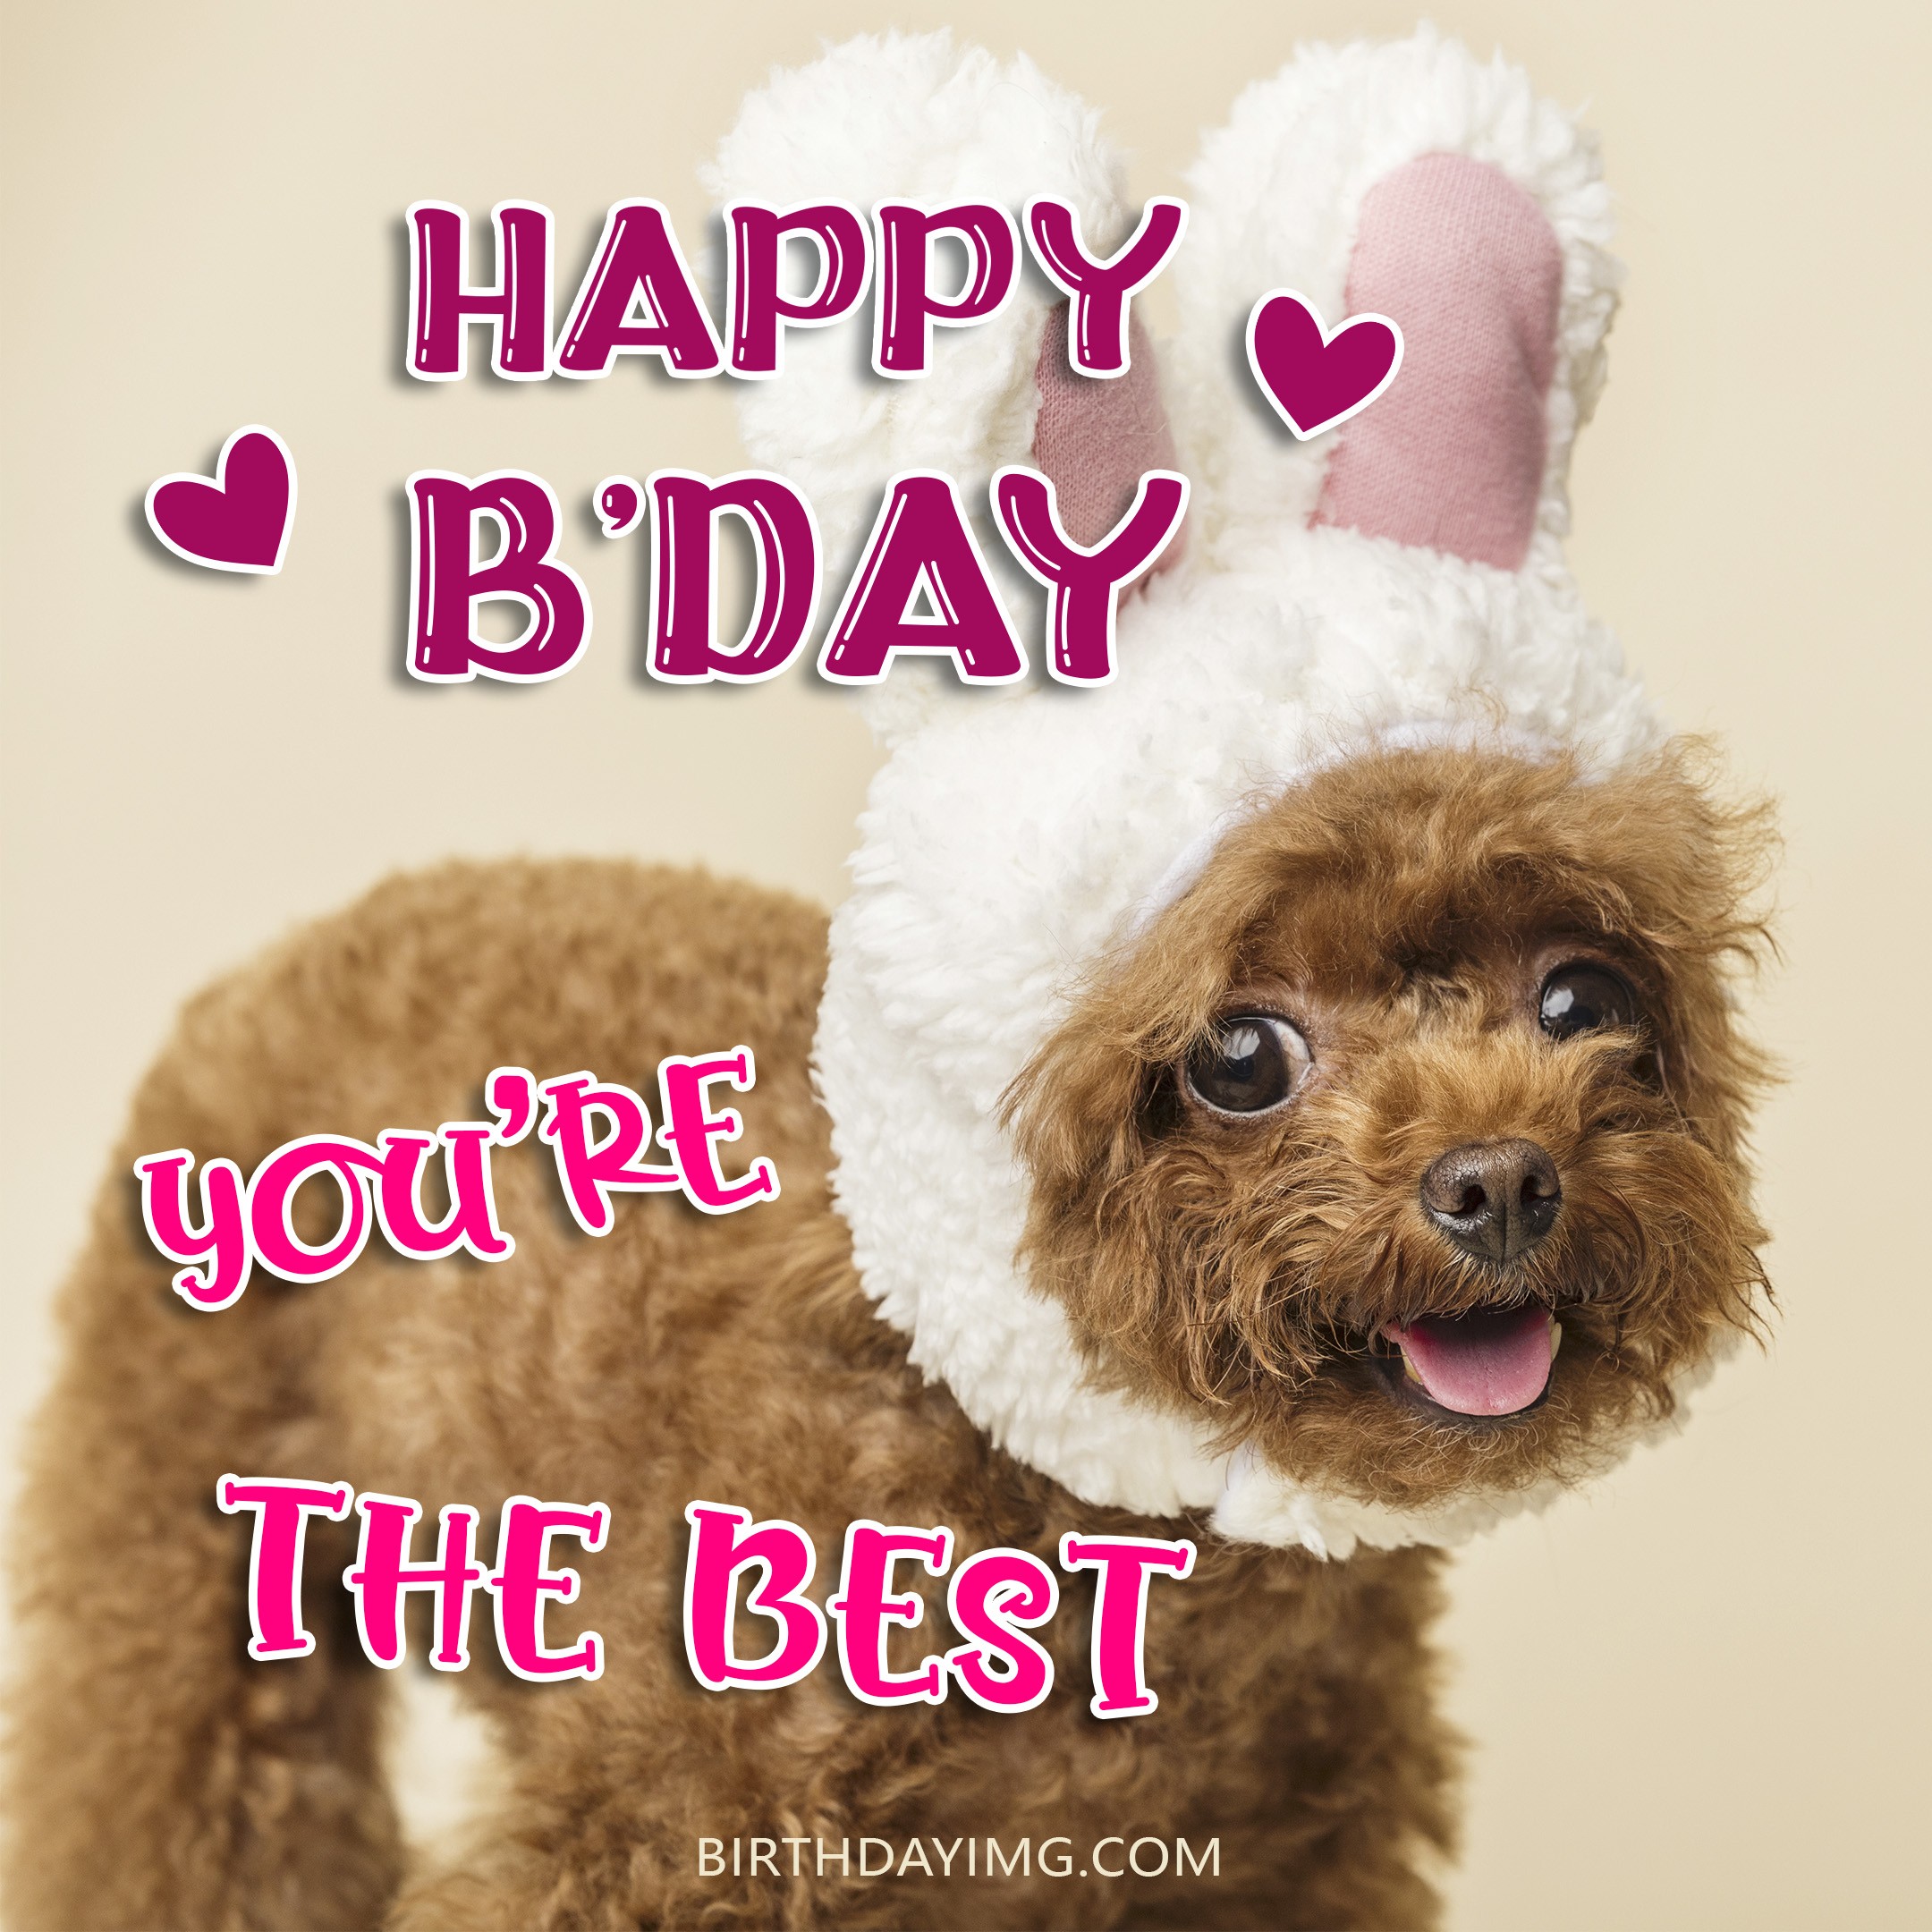 Free Happy Birthday Image For Her (Woman) with Cute Dog - birthdayimg.com